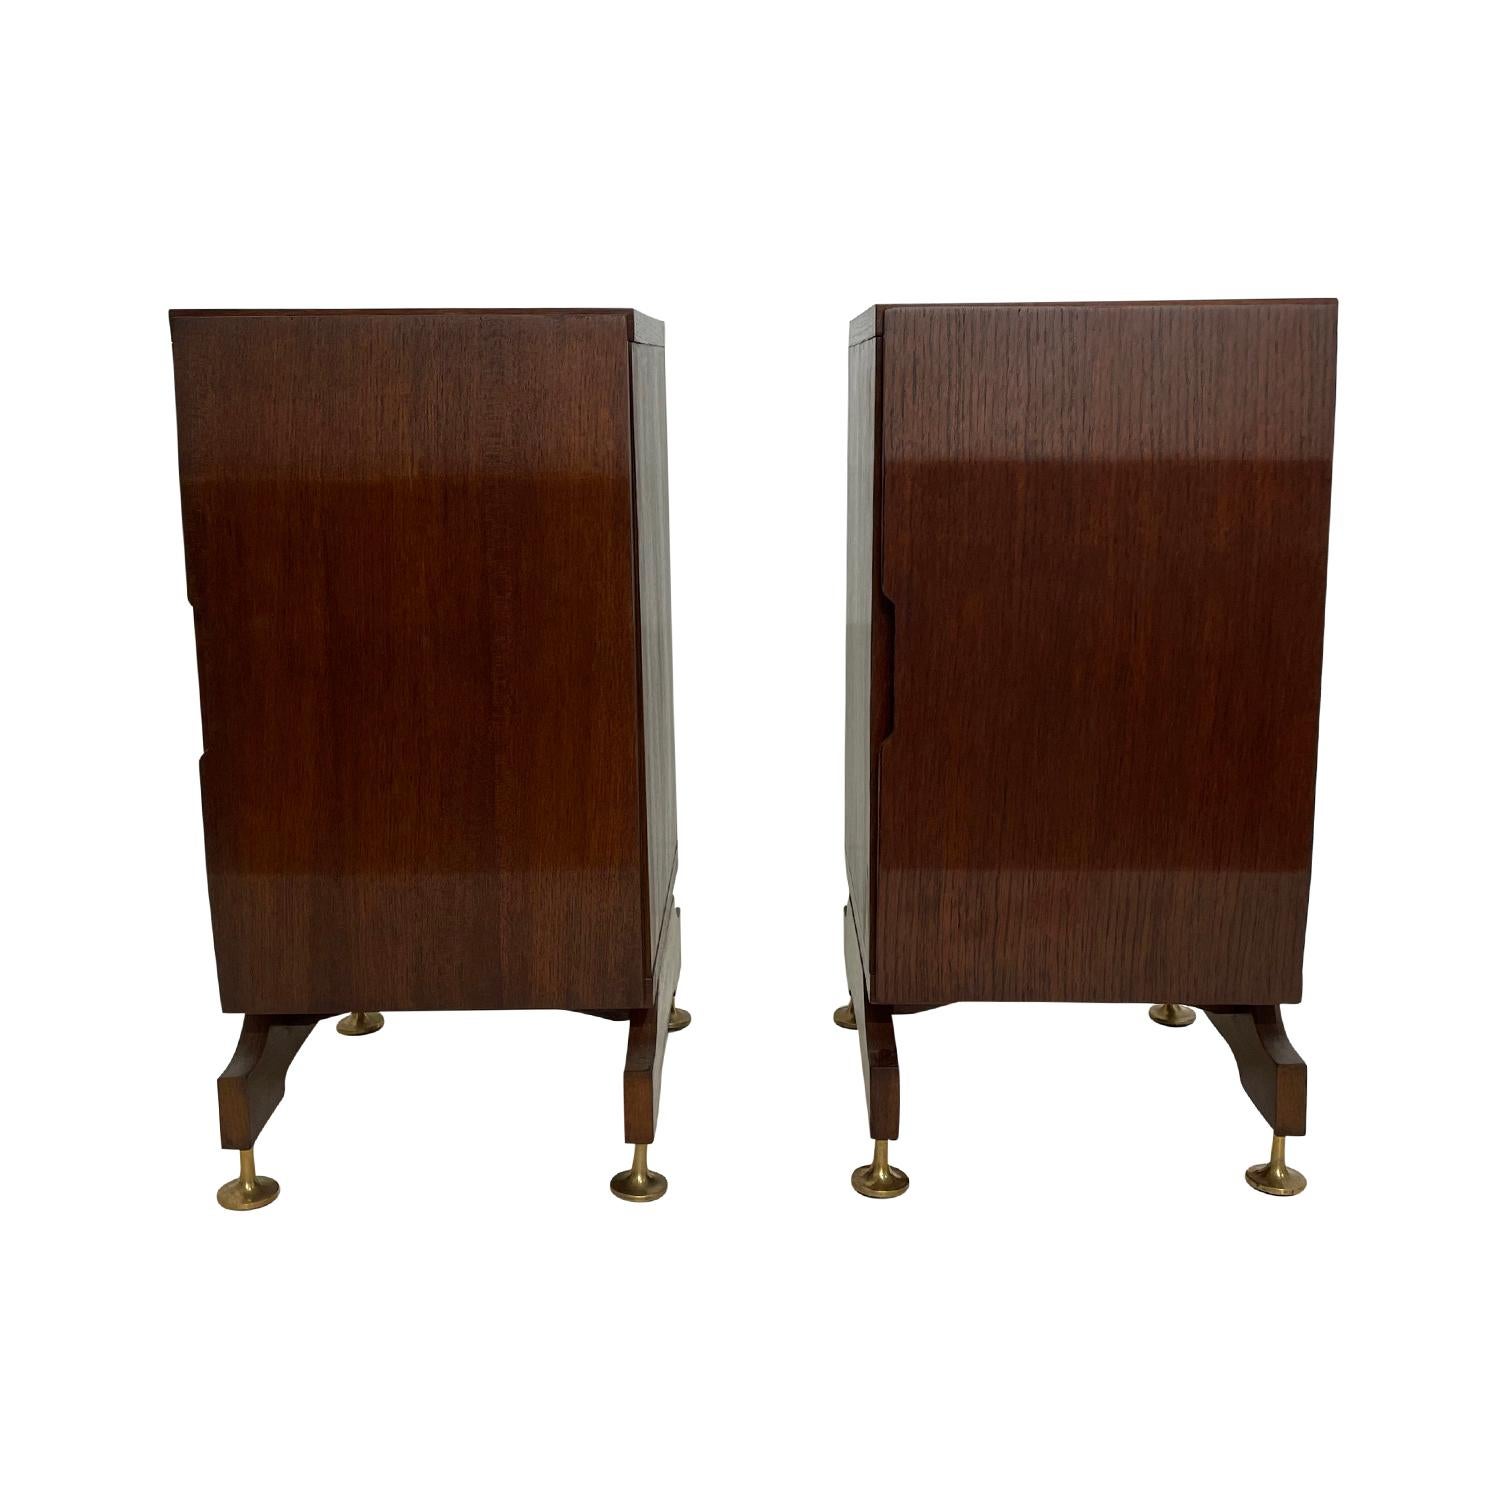 A dark-brown, vintage Mid-Century Modern Italian pair of nightstands made of hand crafted polished Walnut, in good condition. Each of the rectangular bed side tables are composed with a door and interior shelving, resting on an arched wooden base,